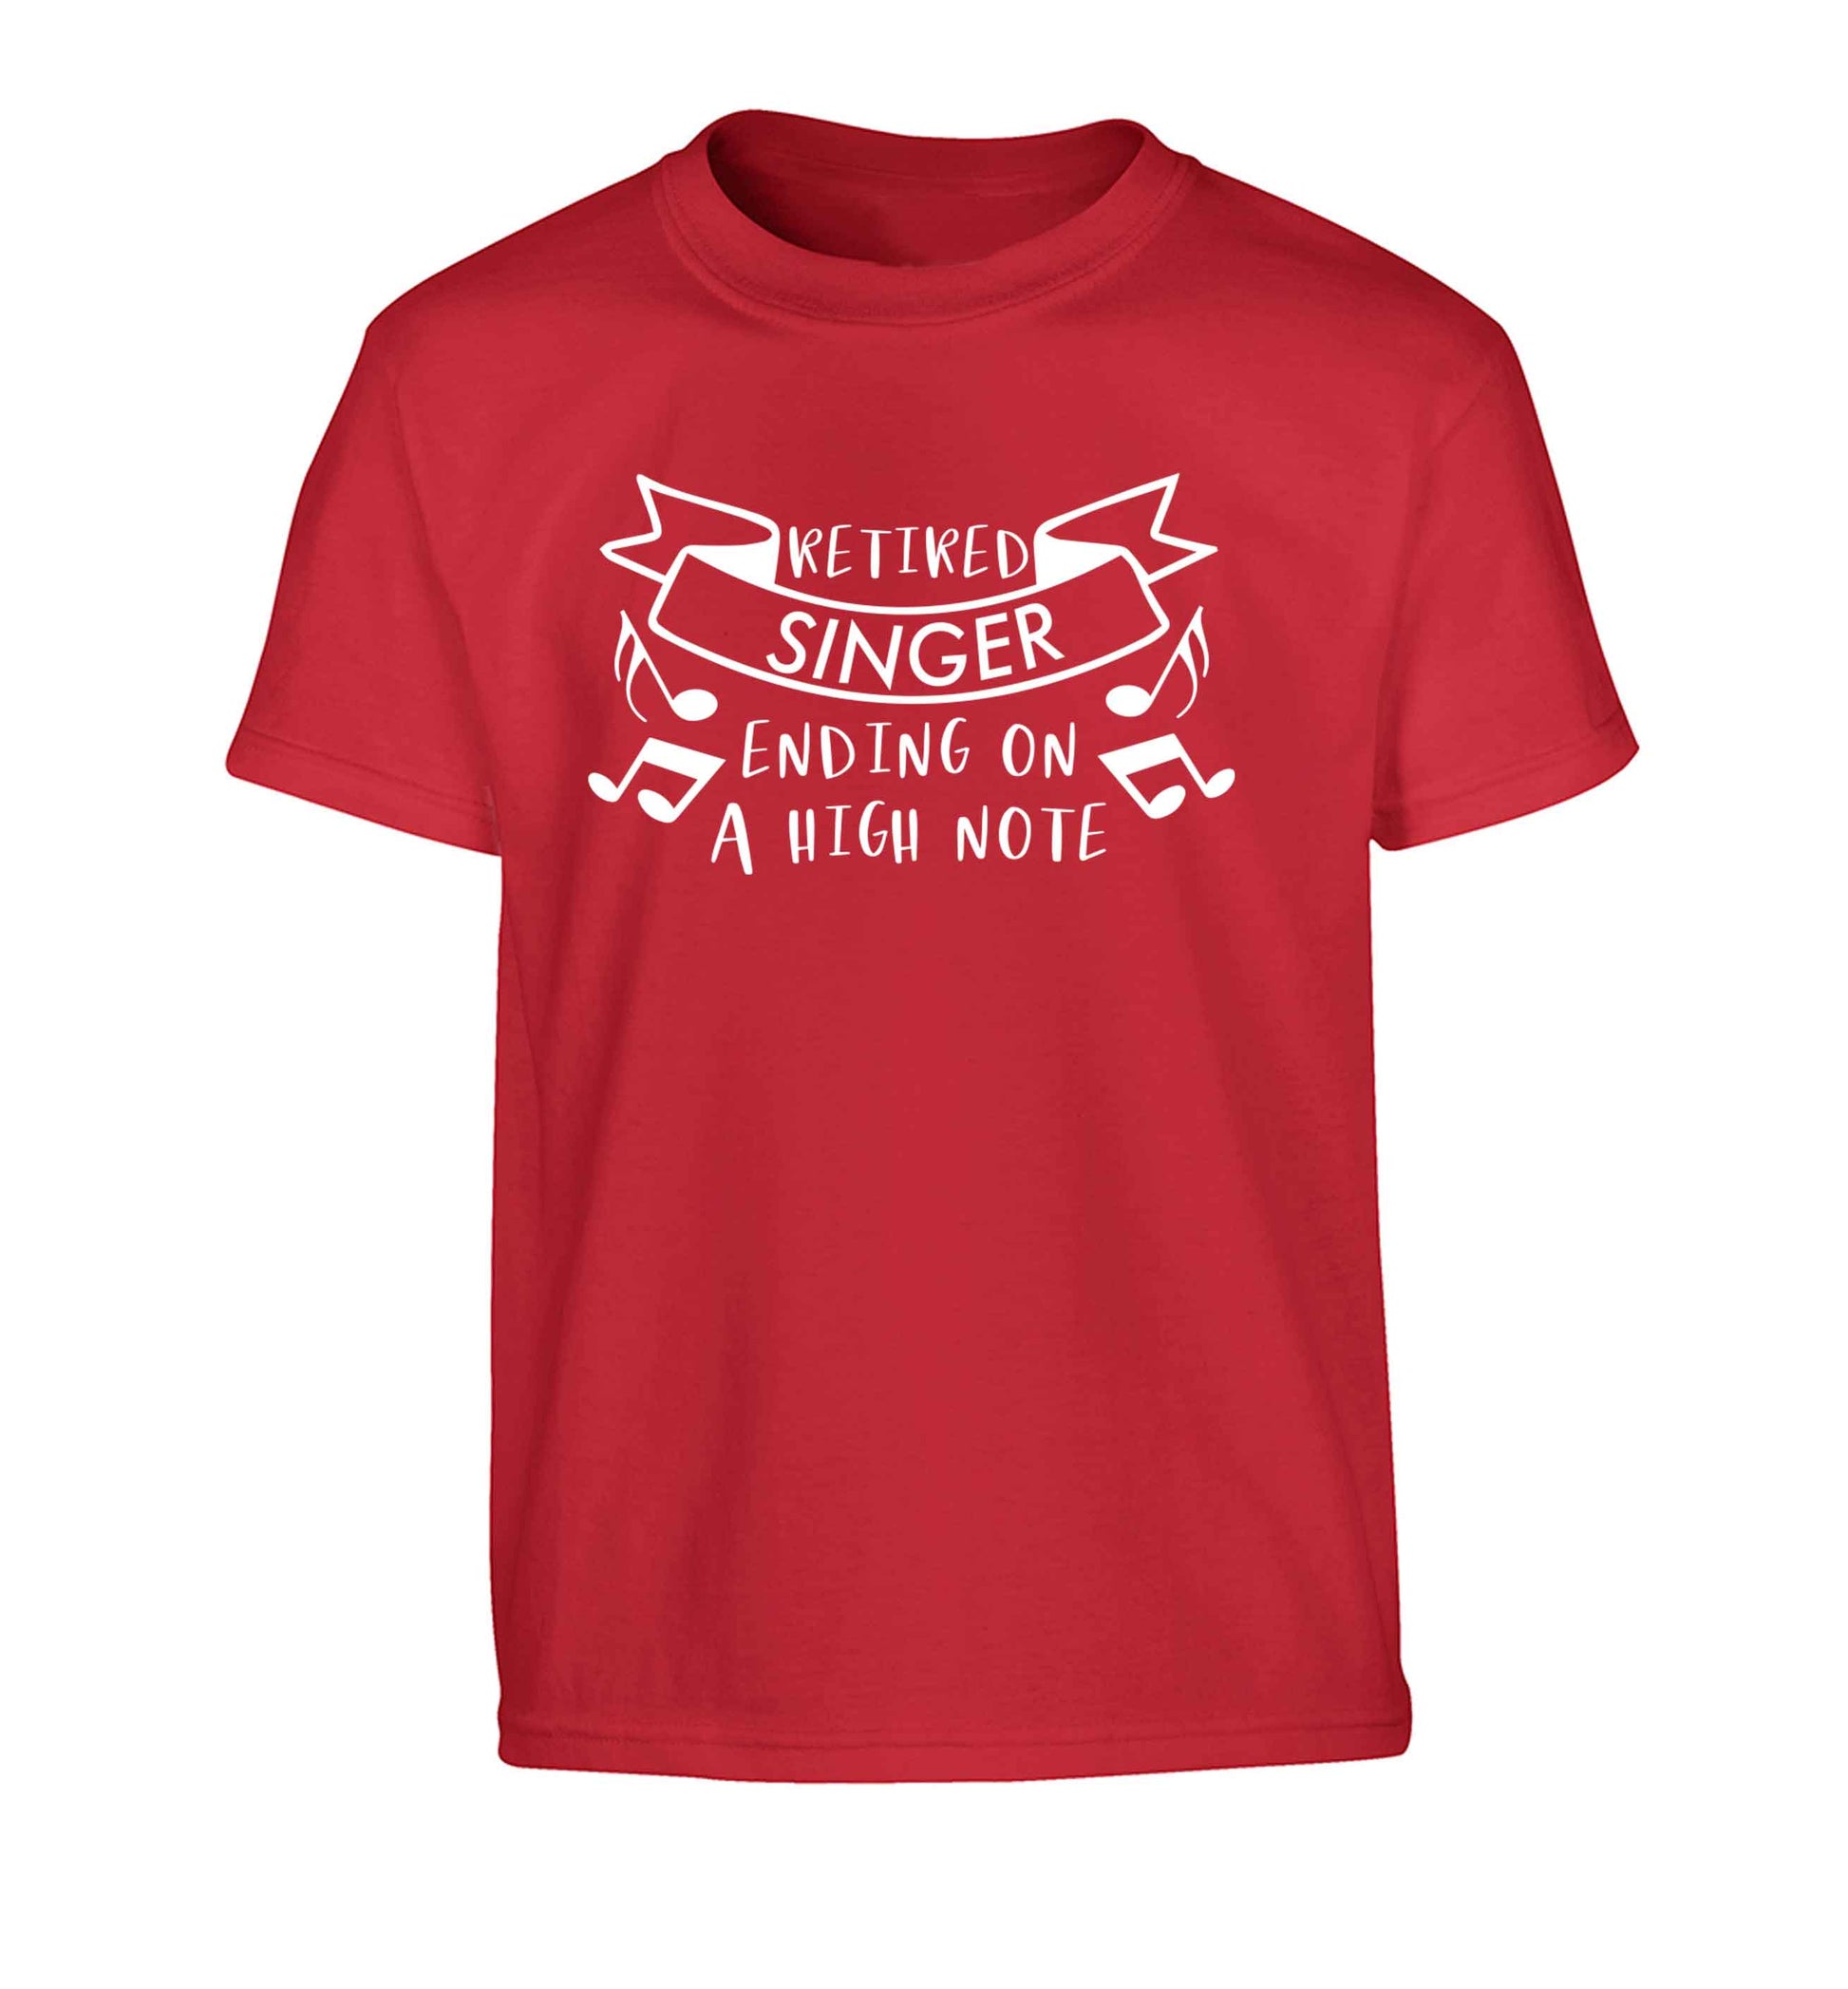 Retired singer ending on a high note Children's red Tshirt 12-13 Years